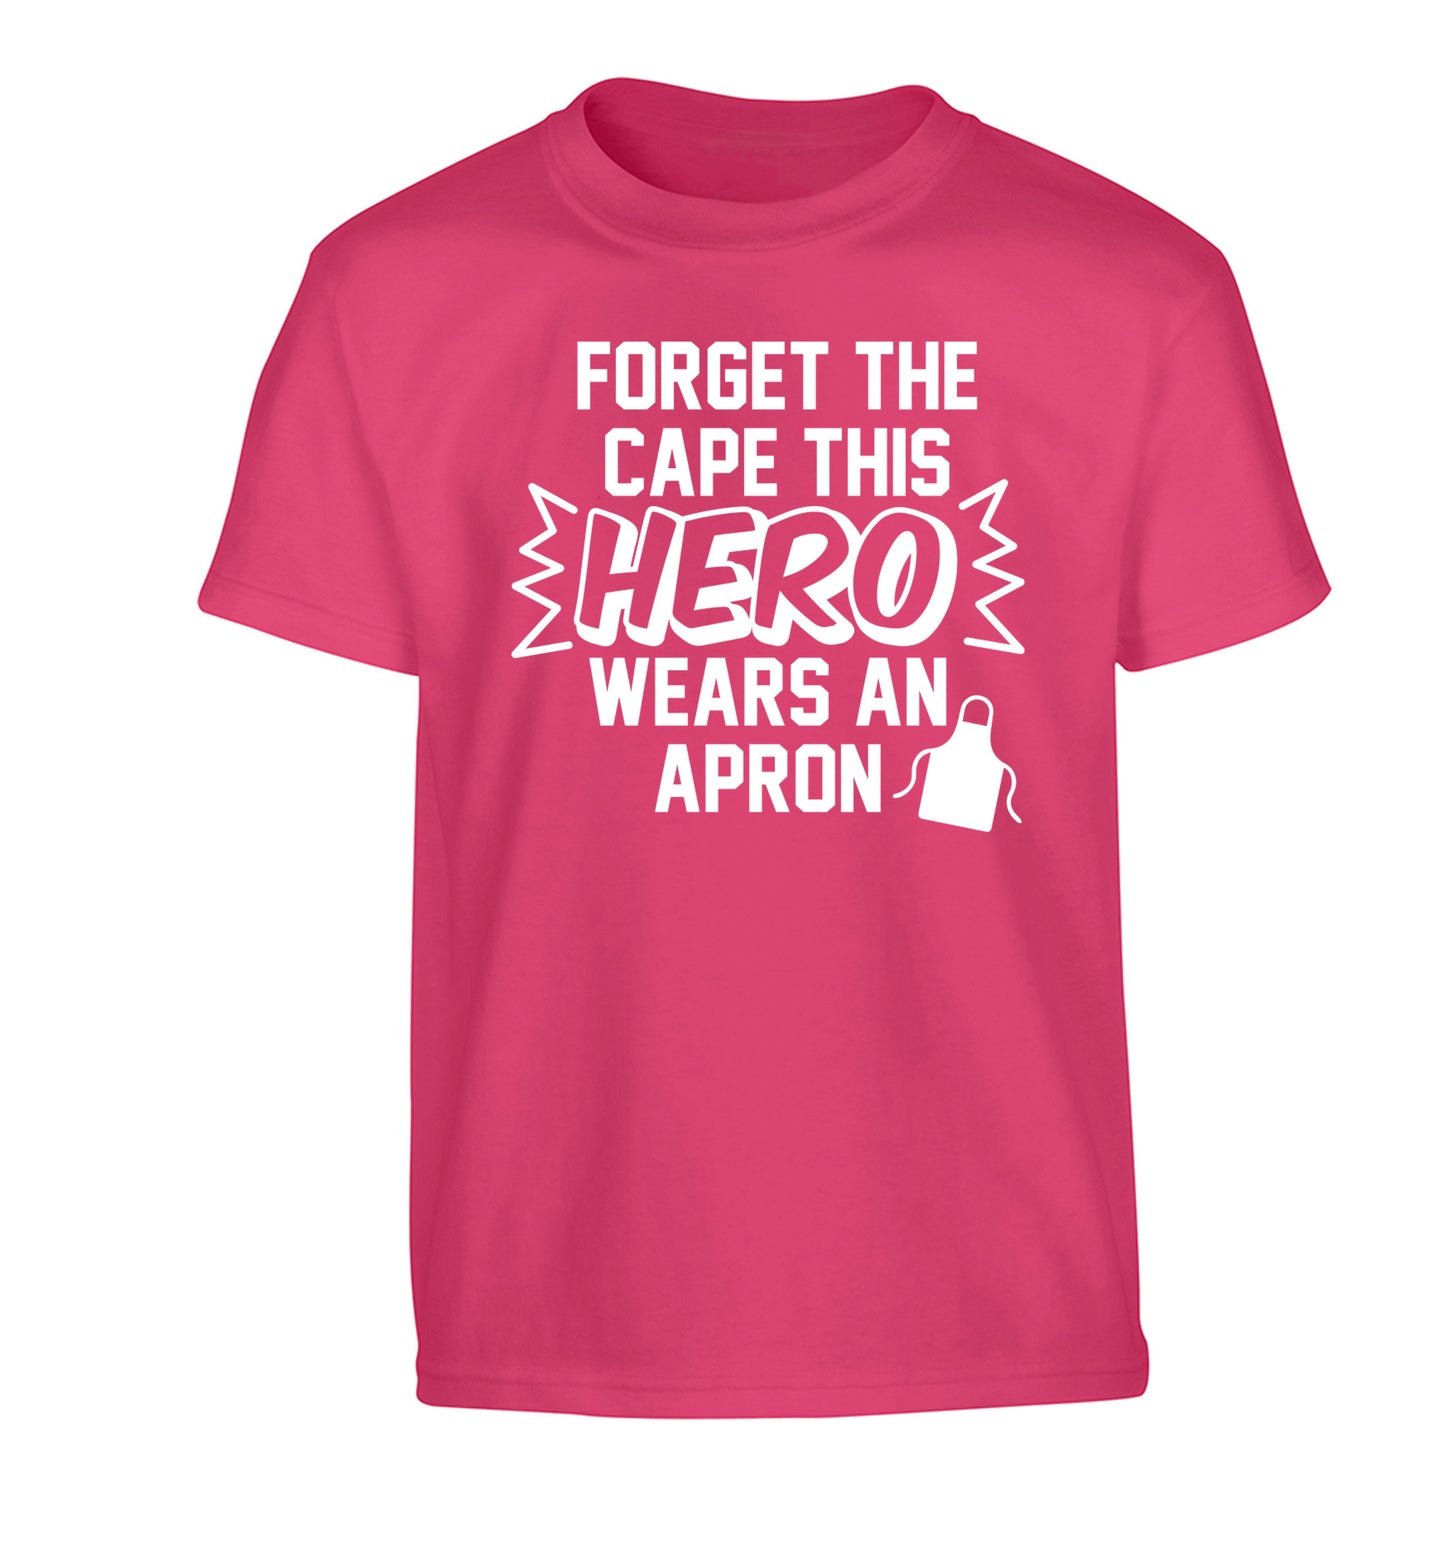 Forget the cape this hero wears an apron Children's pink Tshirt 12-14 Years